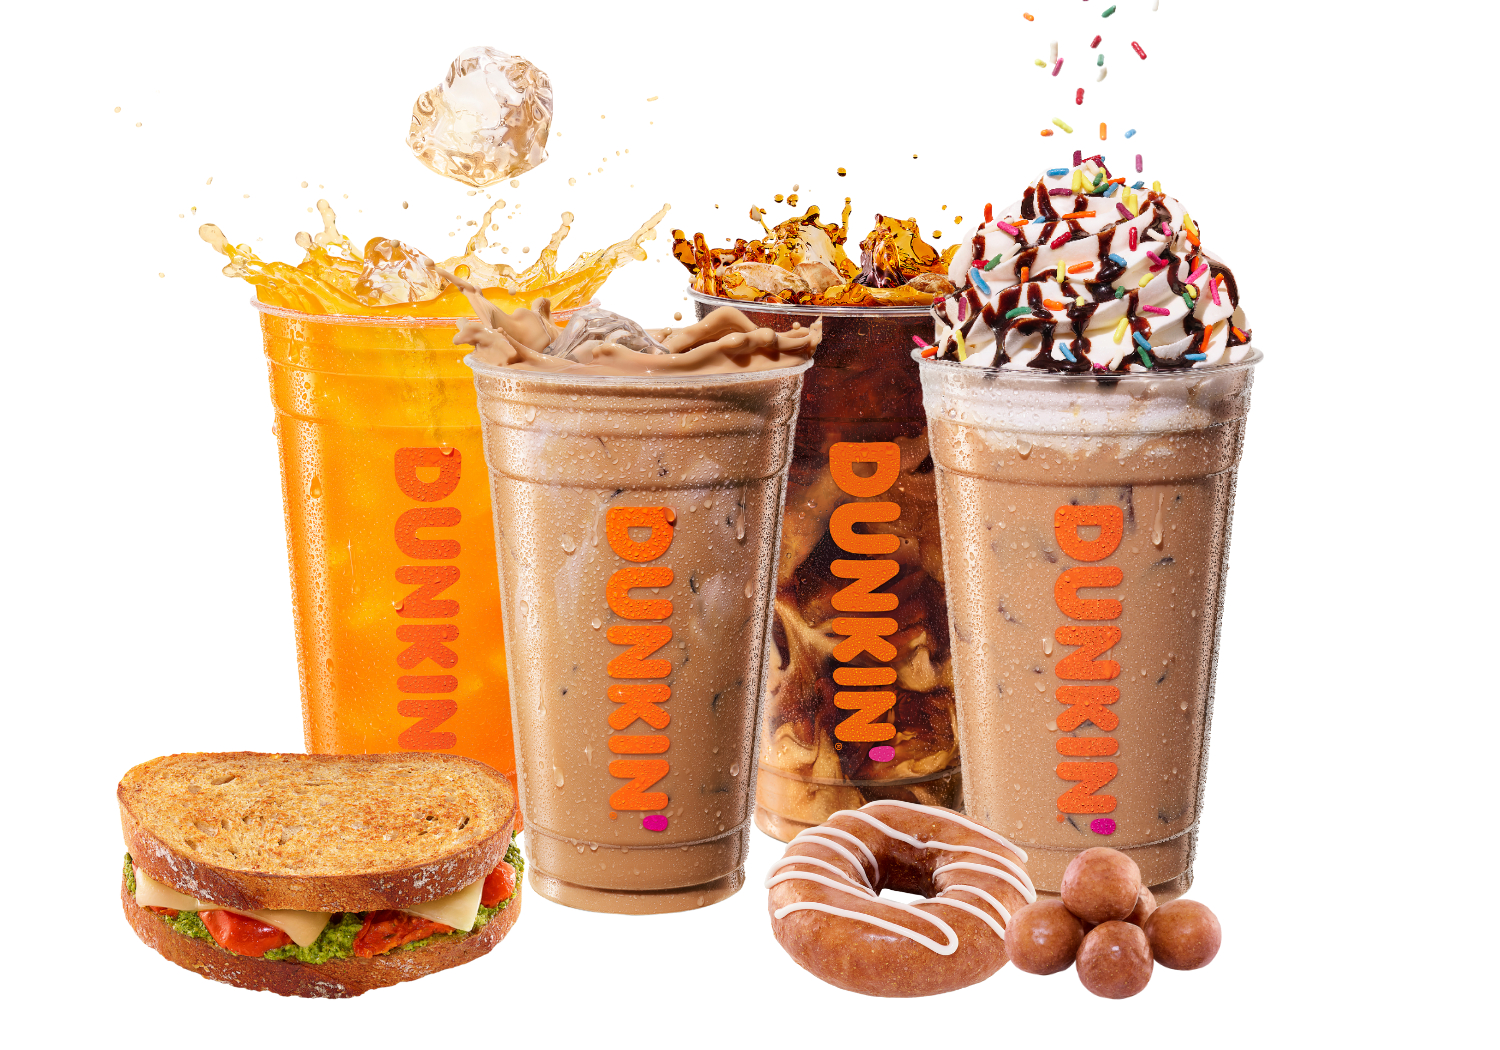 What are the refresher drinks at Dunkin Donuts